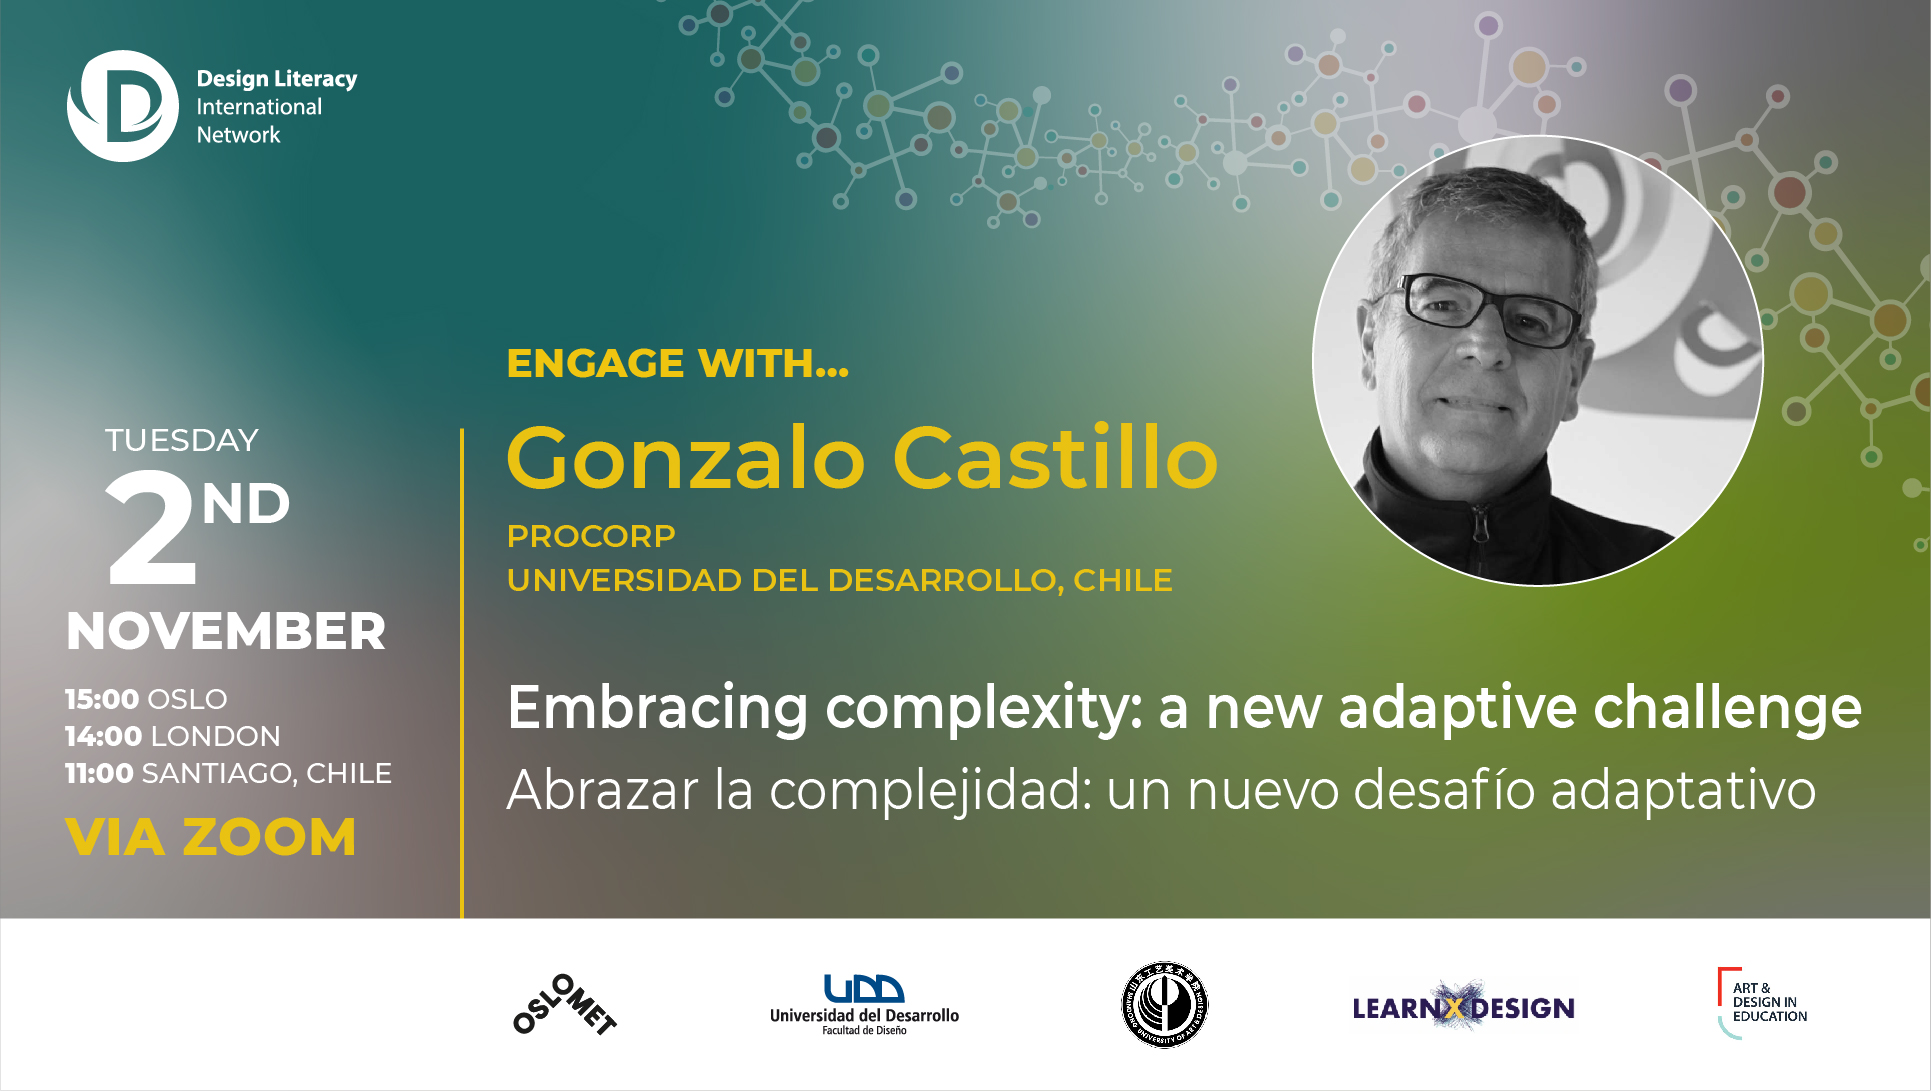 You are currently viewing Engage with Gonzalo Castillo | Design Literacy International Network event